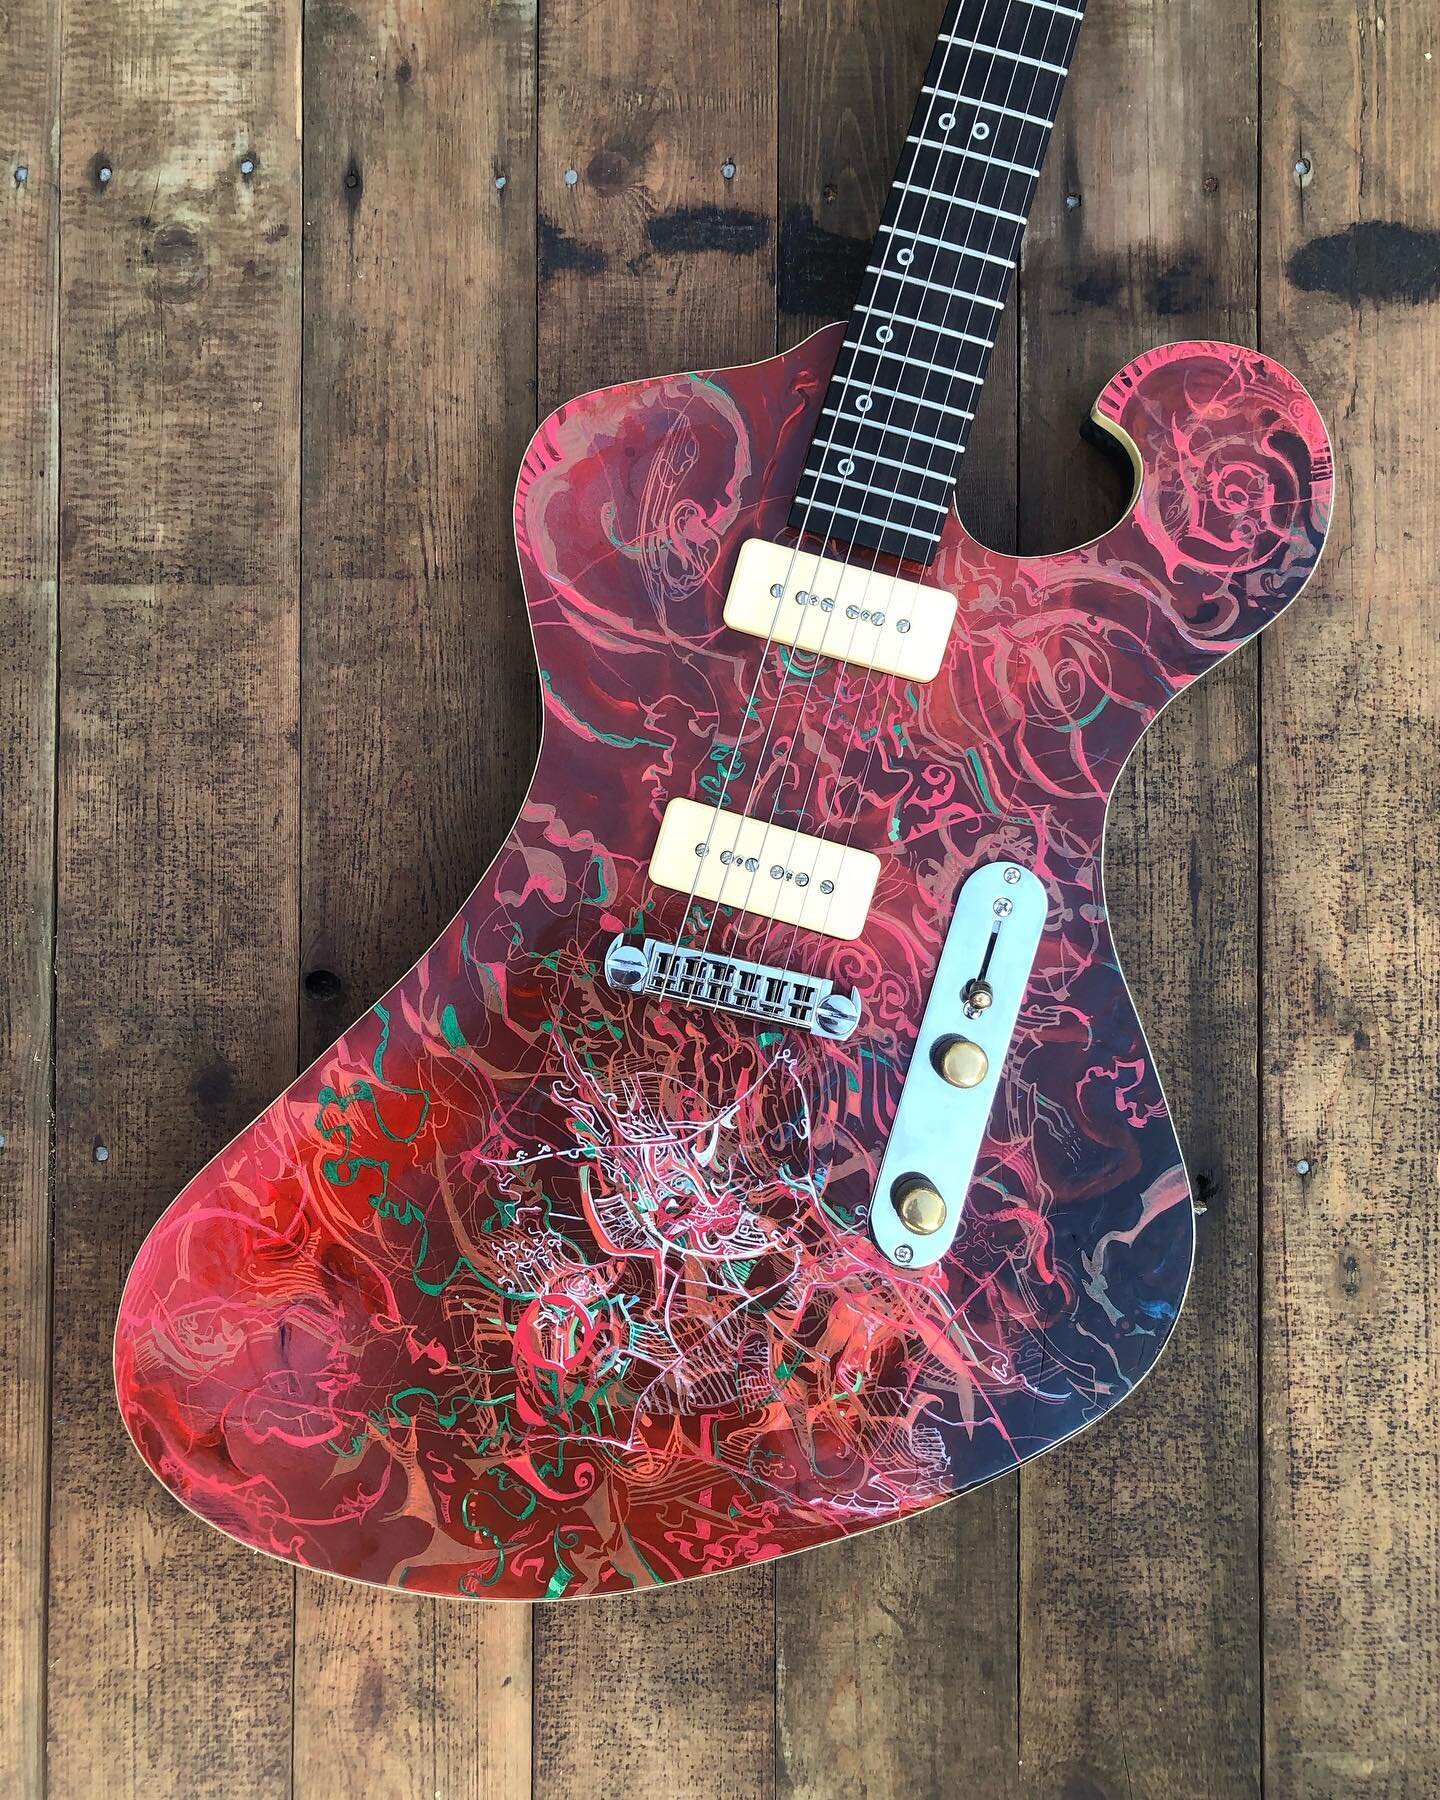 Going back to last year, I did this amazing collaboration with @eddierifkind. Truly amazing art work combined with a custom built guitar that plays and sounds amazing 🙂😍😁
.

 #art #fineart #acrylicpainting #abstractart #abstractpainting #collabora